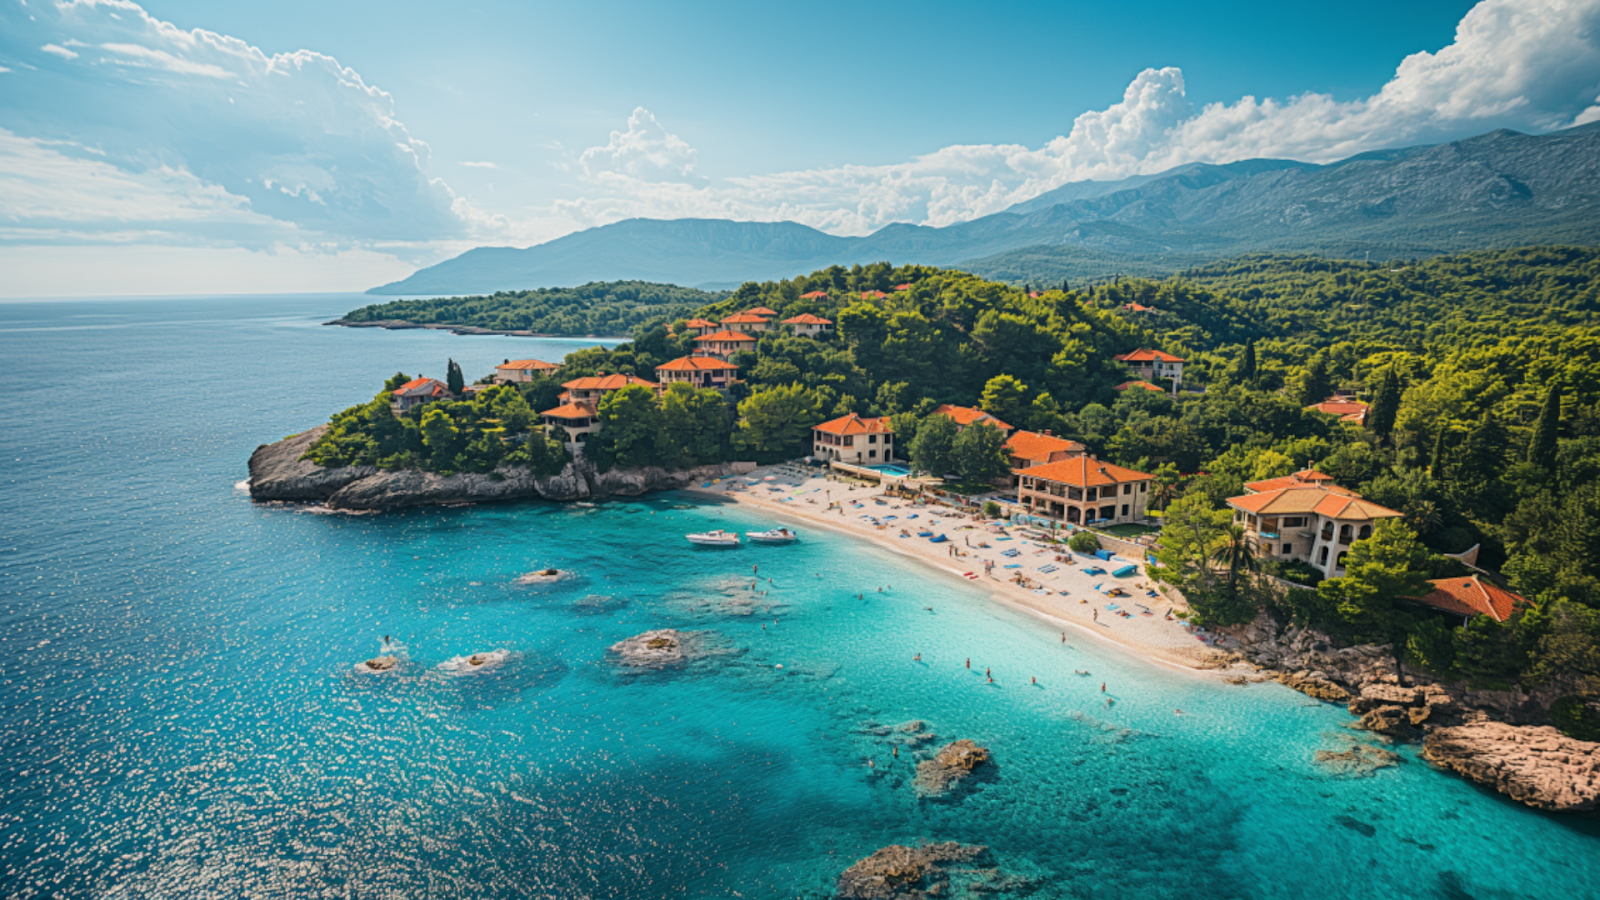 Panoramic view of Golden Cape in Brač with its unique, wind-shaped shoreline amidst lush greenery.